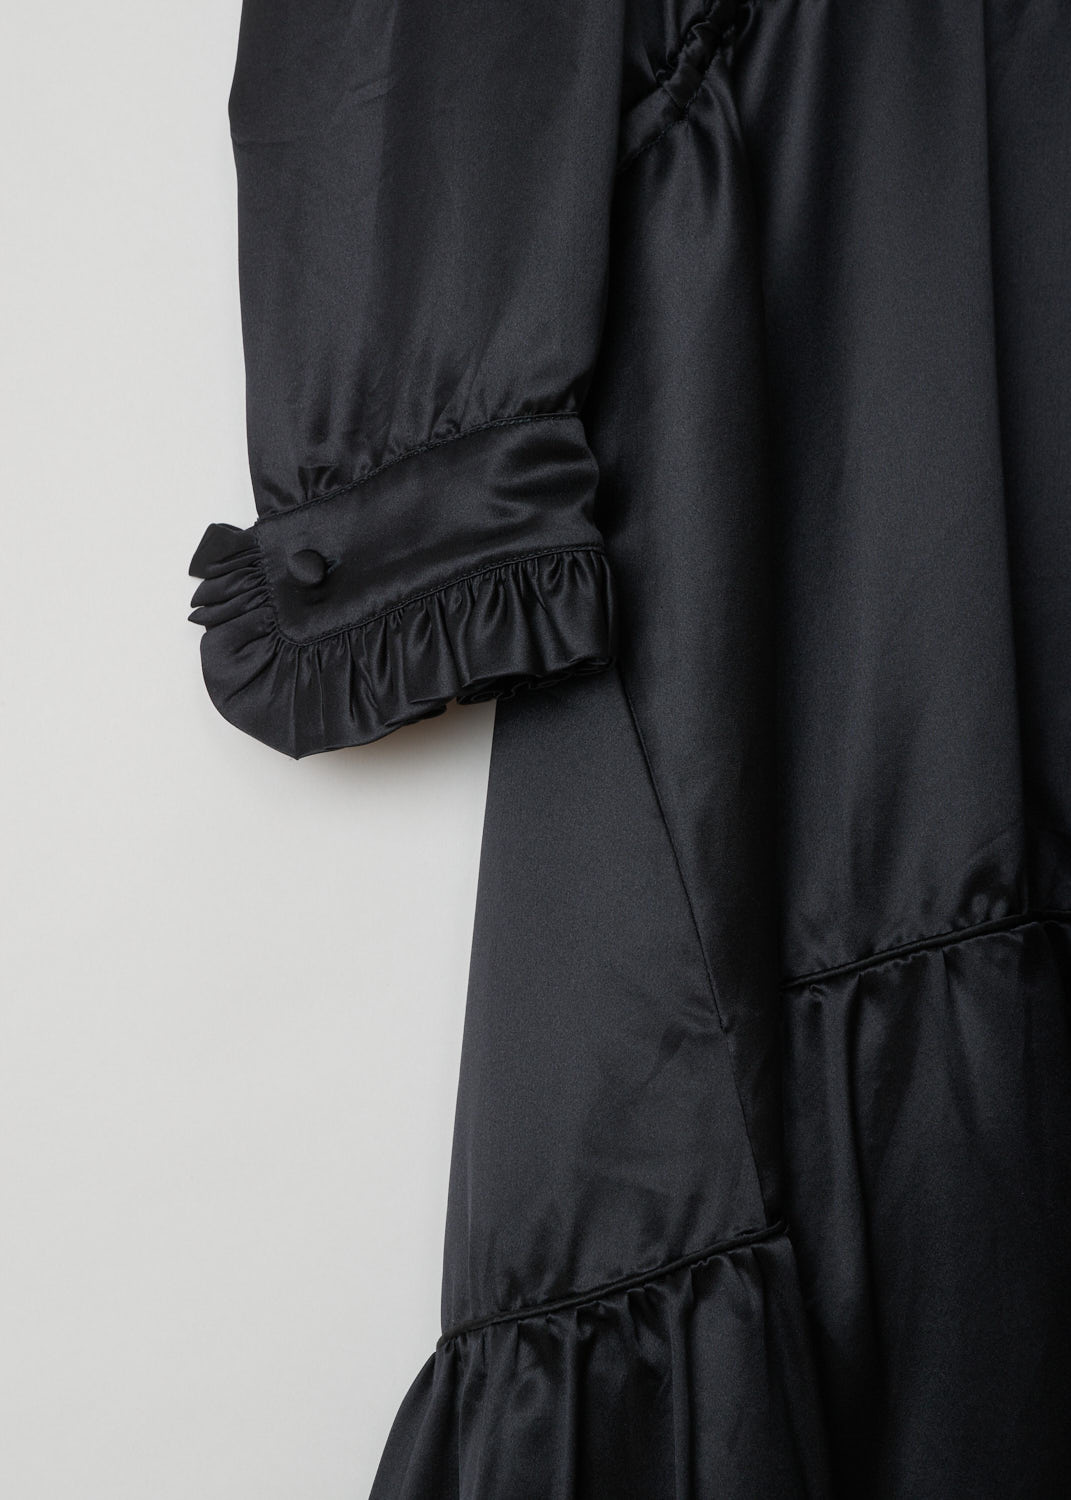 Balenciaga, Black ruffled dress, 494197_TXC02_1000, black, detail. This all black dress has a ruffled neckline and cuffs which have a single button. A cord tunnel divides the skirt from the top. The closure option on this piece is the single button on the back.